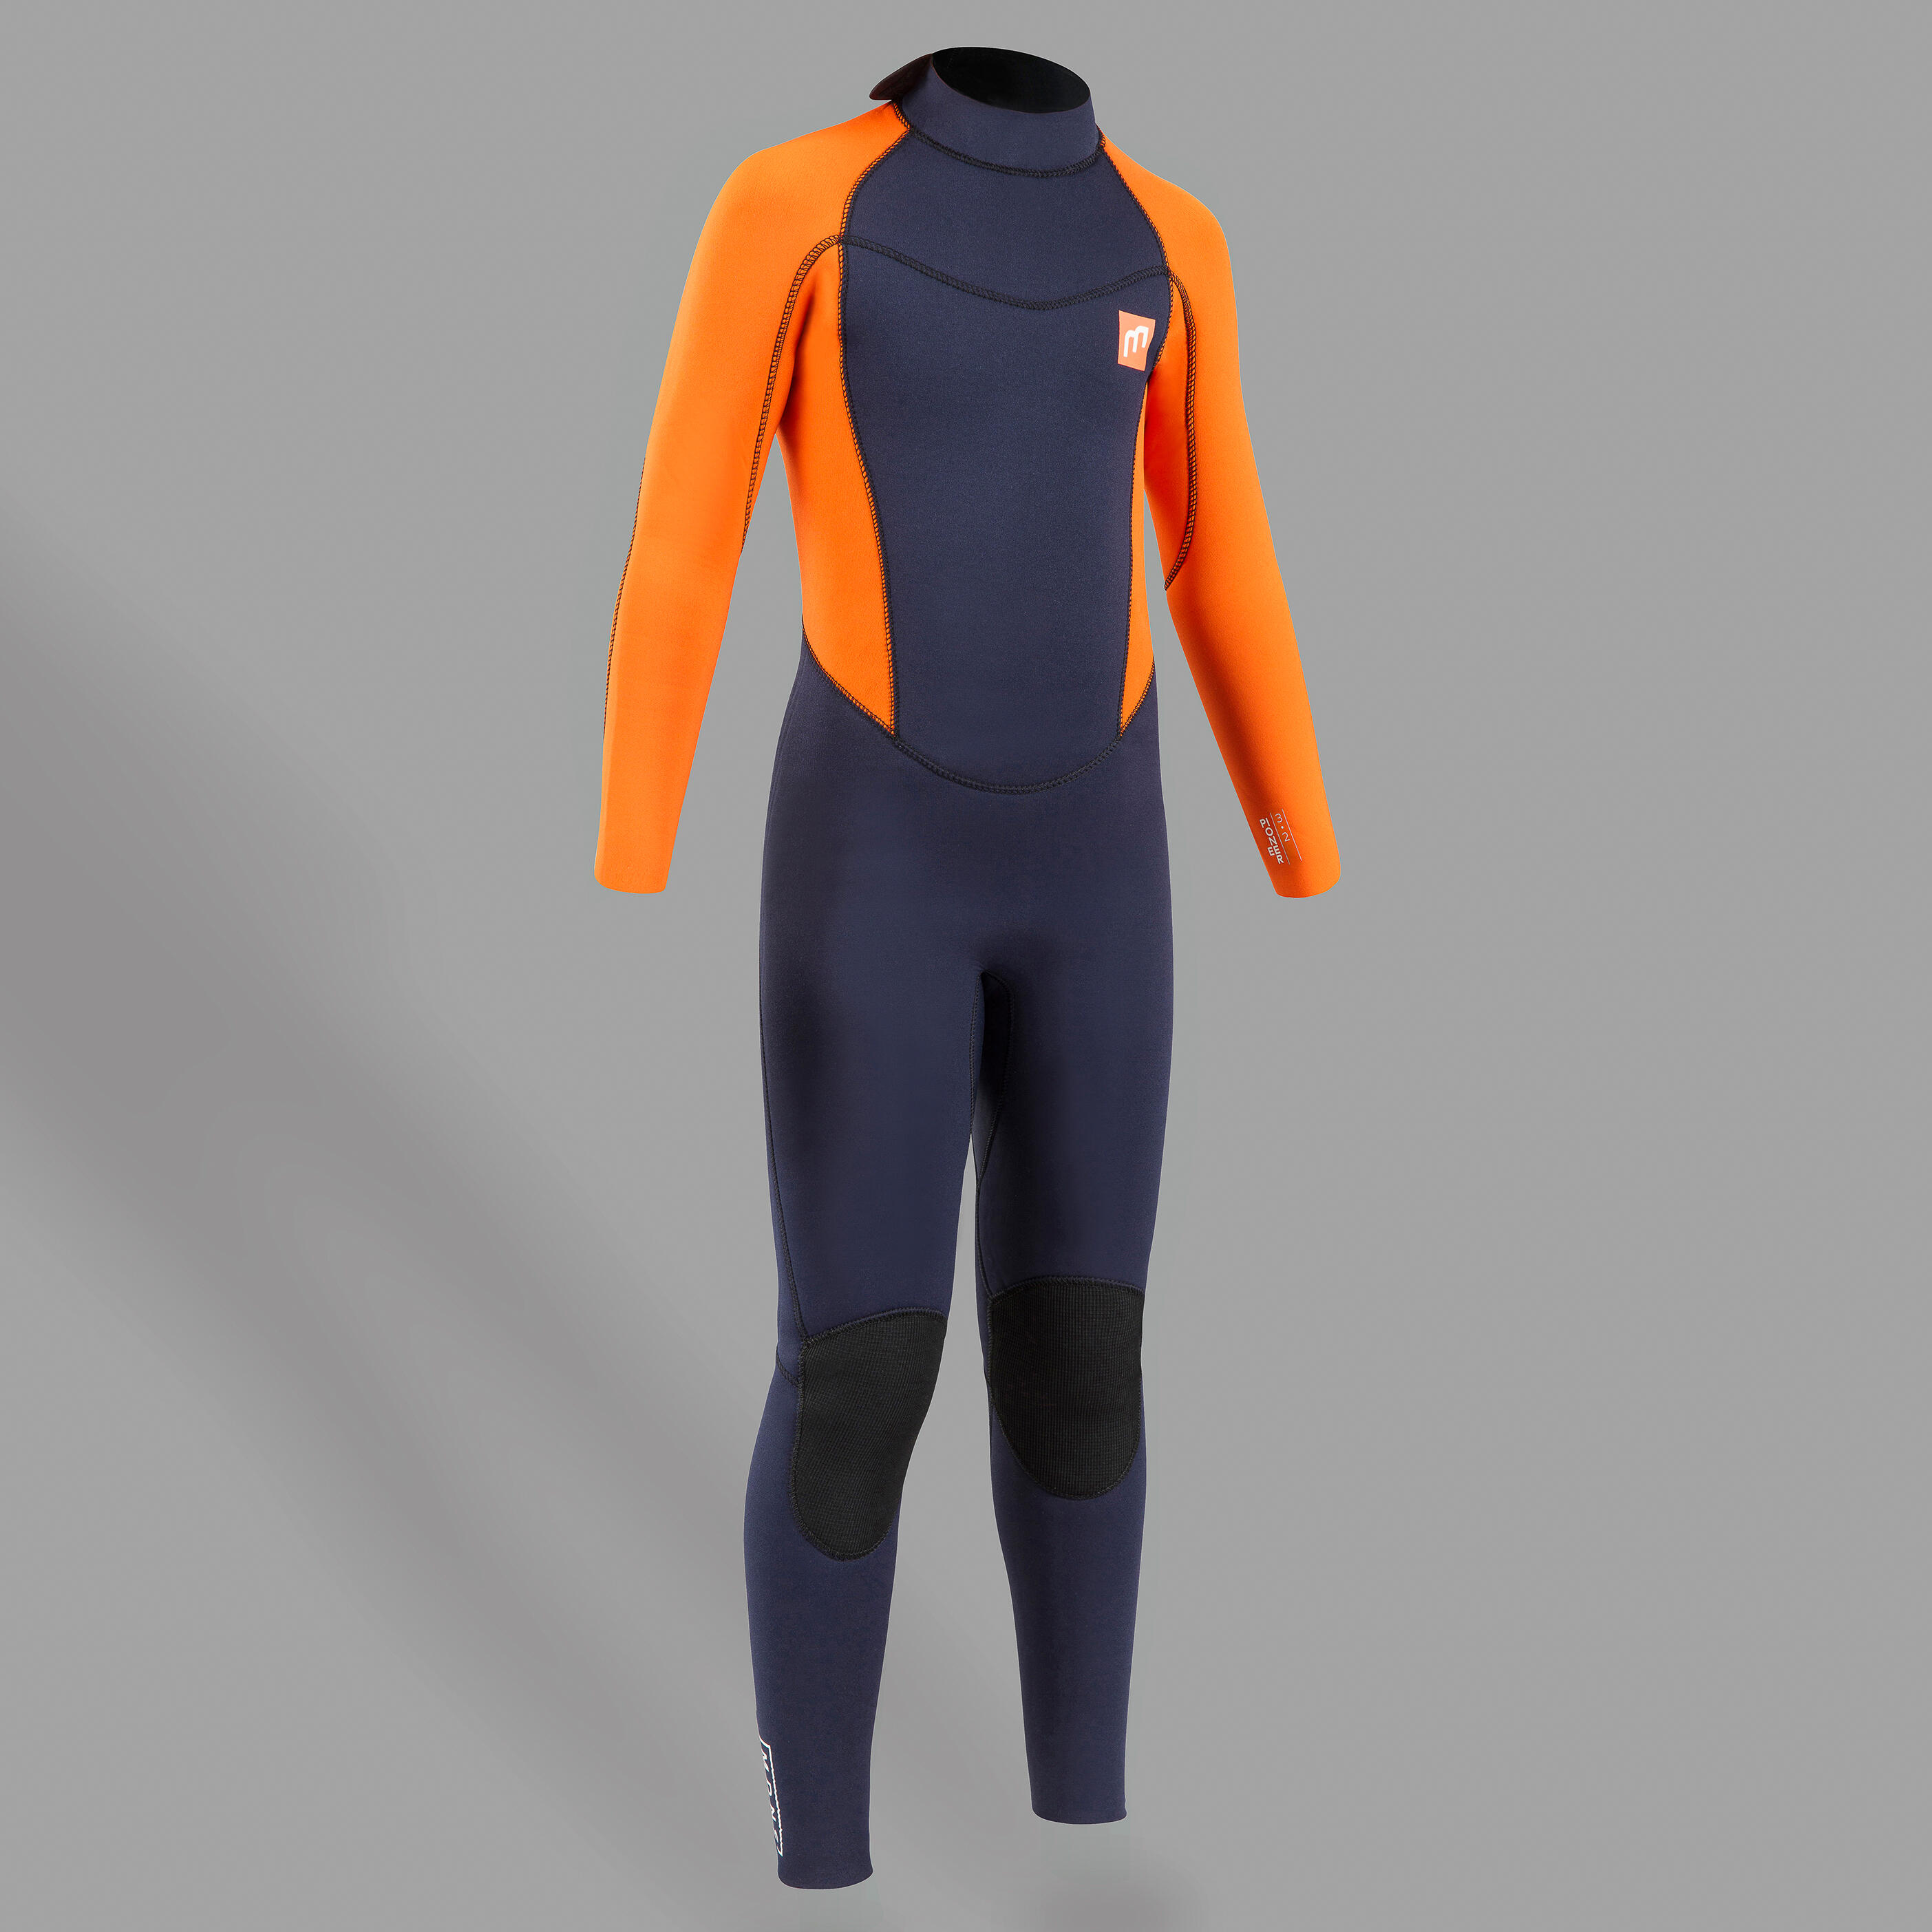 MADNESS Kid's Full body wetsuit 3/2 Pionneer Madness 